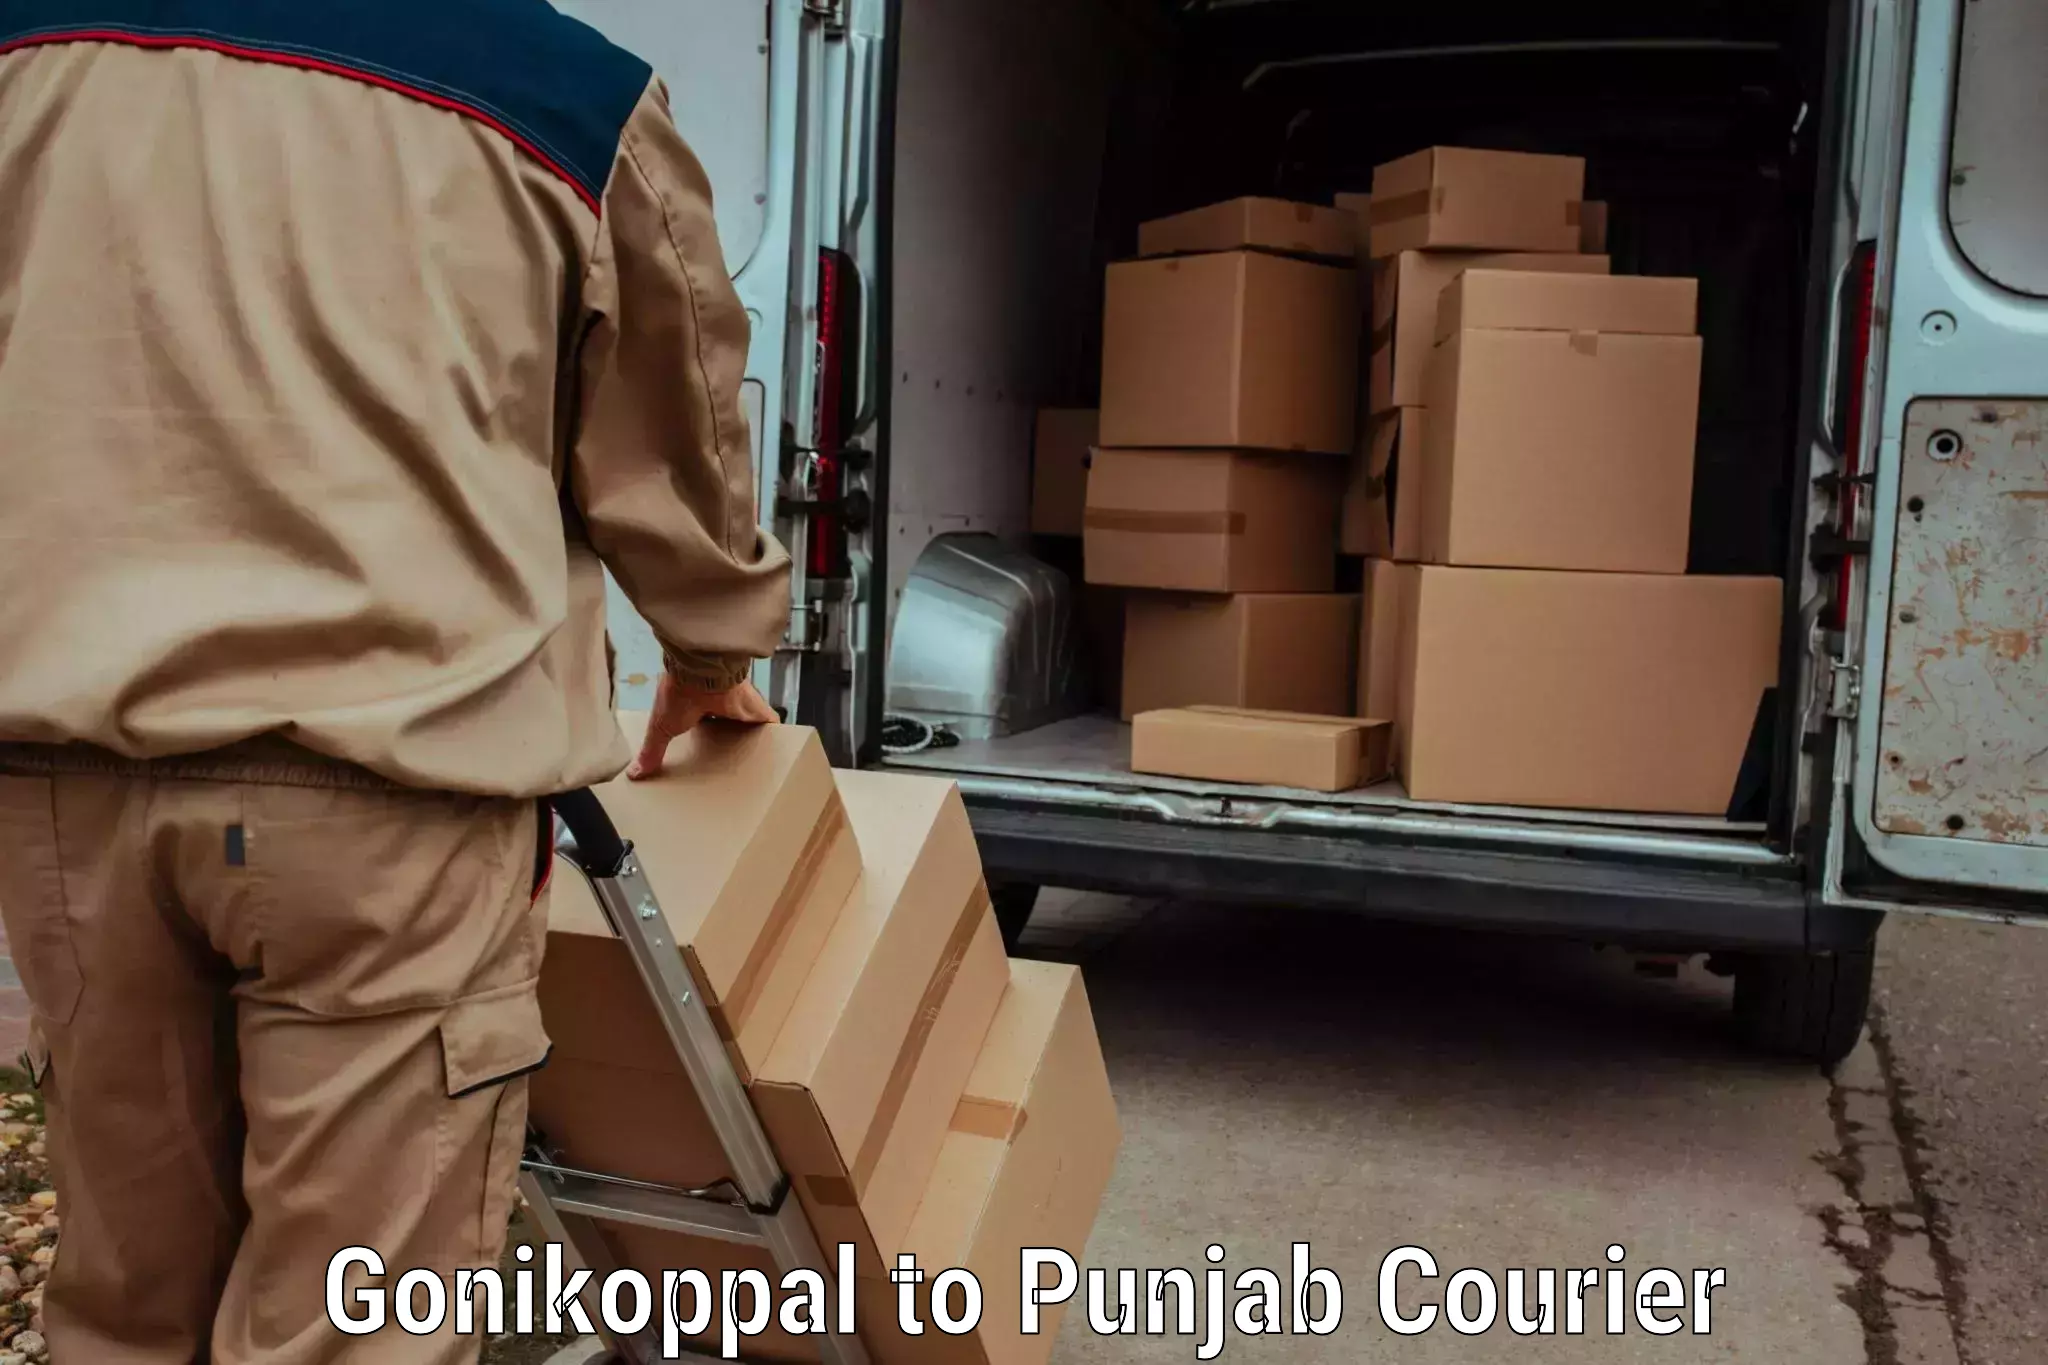 Express delivery network Gonikoppal to Zirakpur